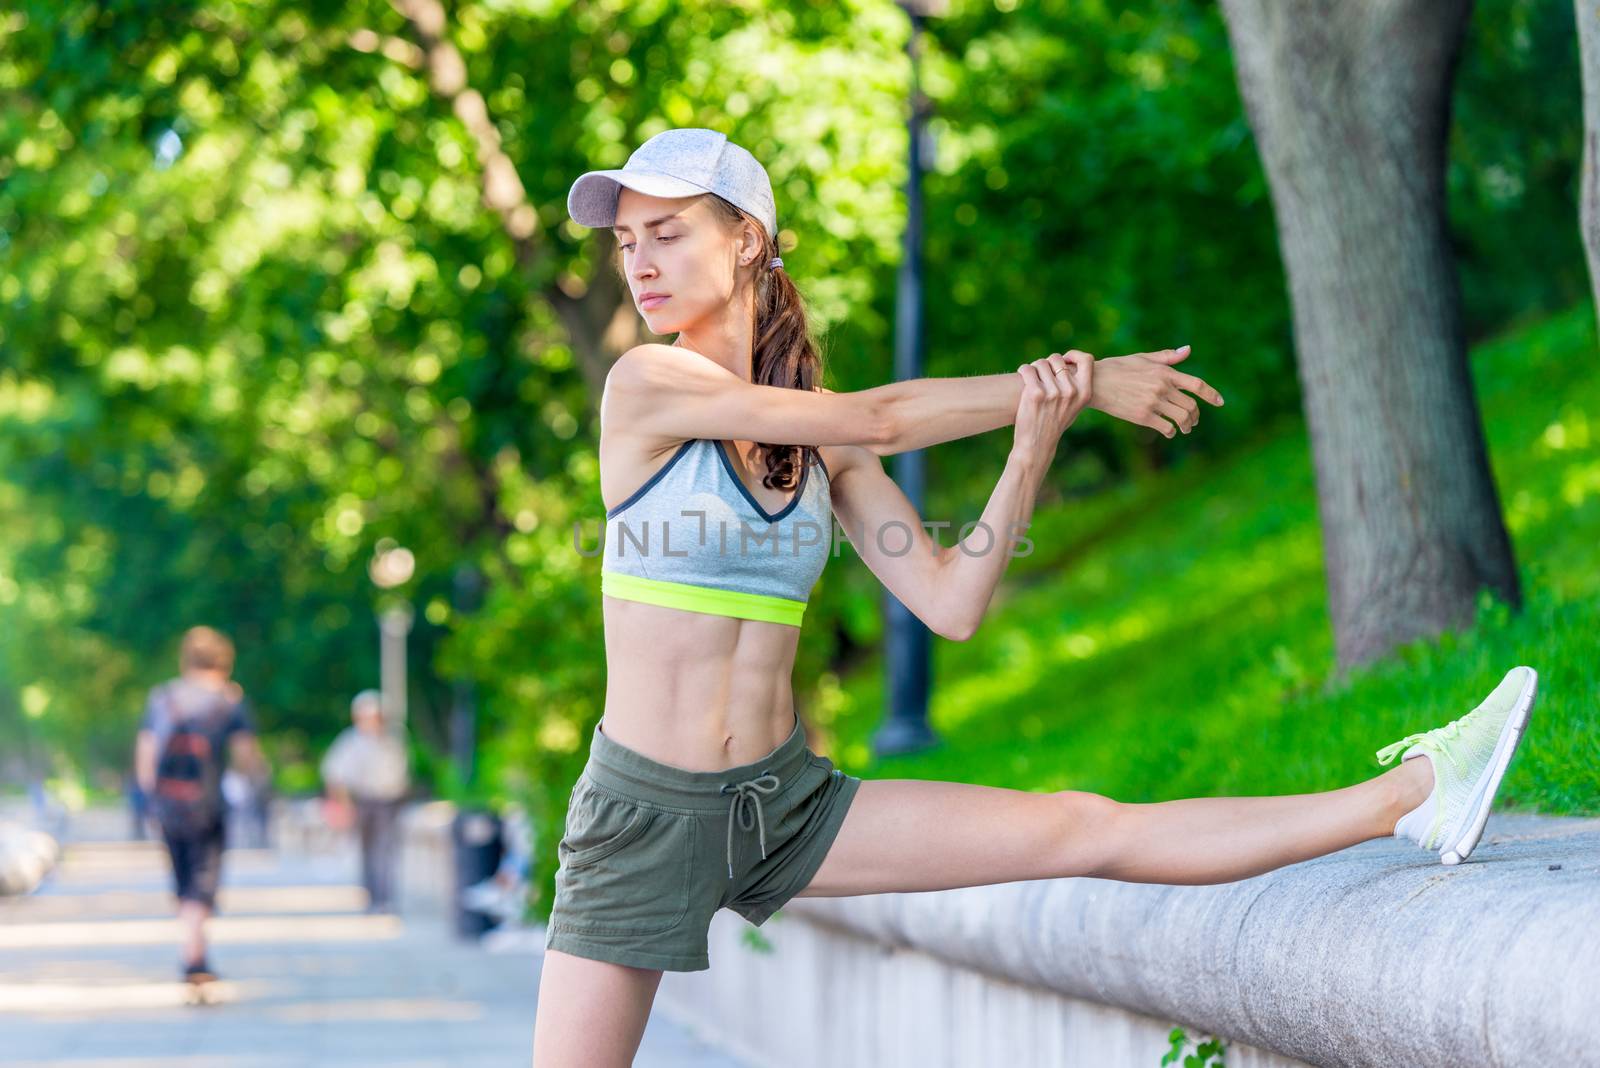 slender woman athlete warming up before jogging in a city park, by kosmsos111